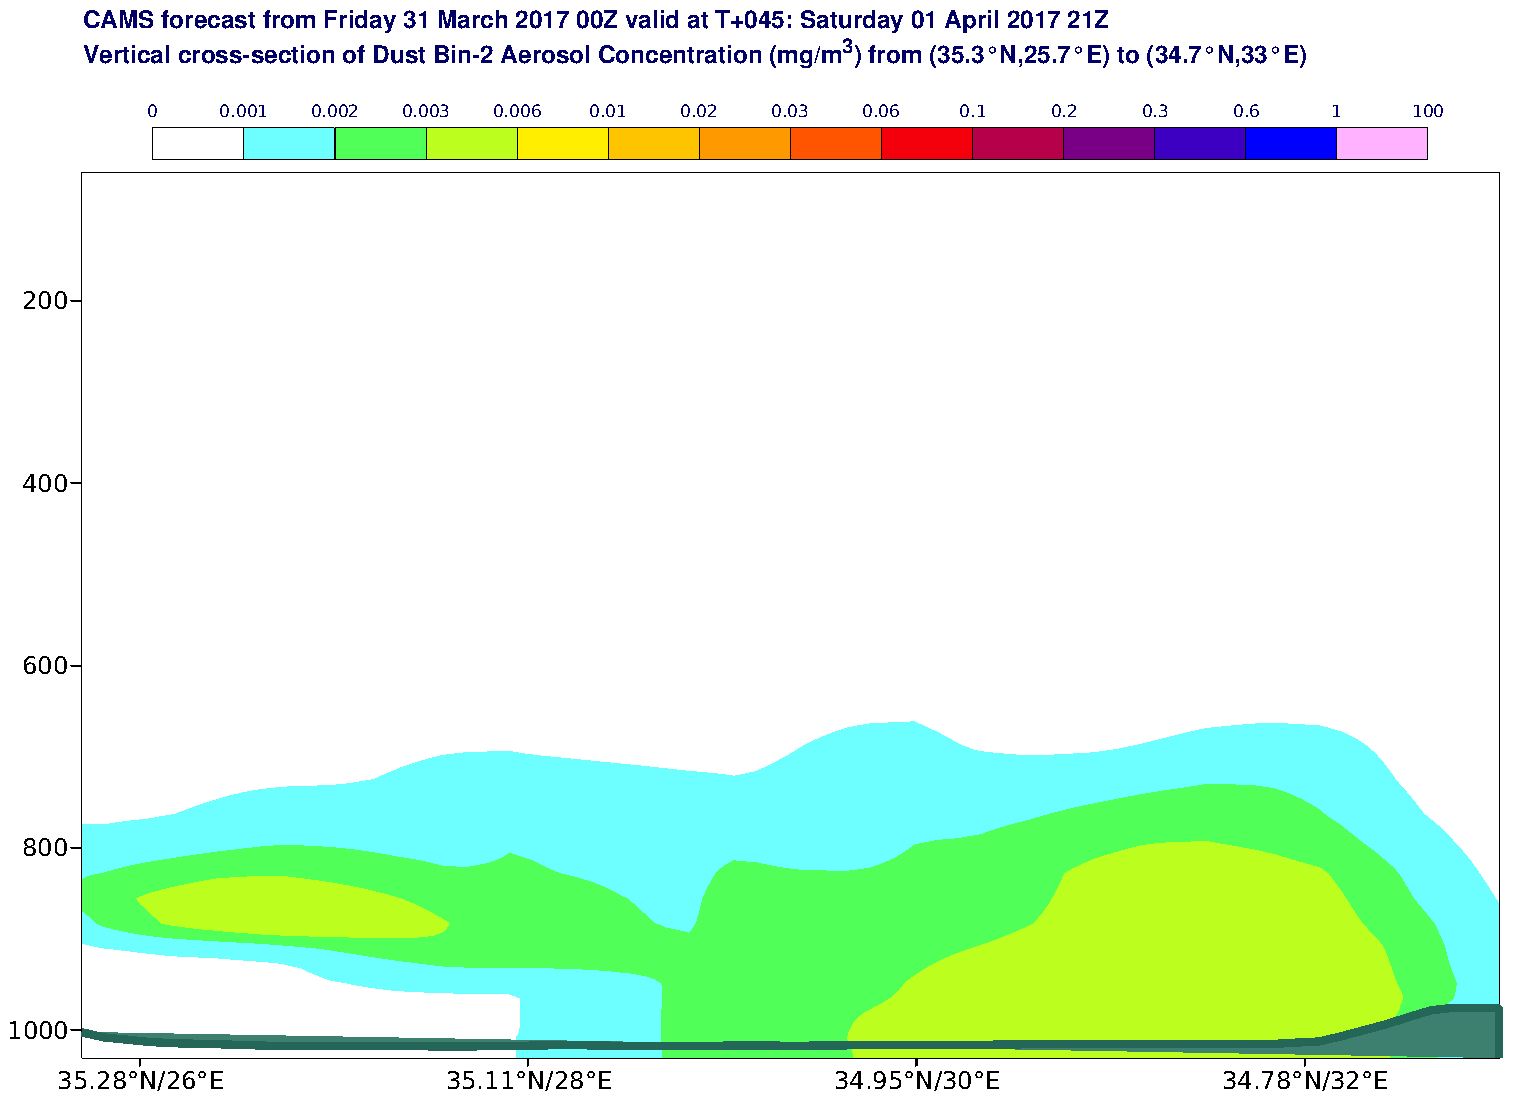 Vertical cross-section of Dust Bin-2 Aerosol Concentration (mg/m3) valid at T45 - 2017-04-01 21:00